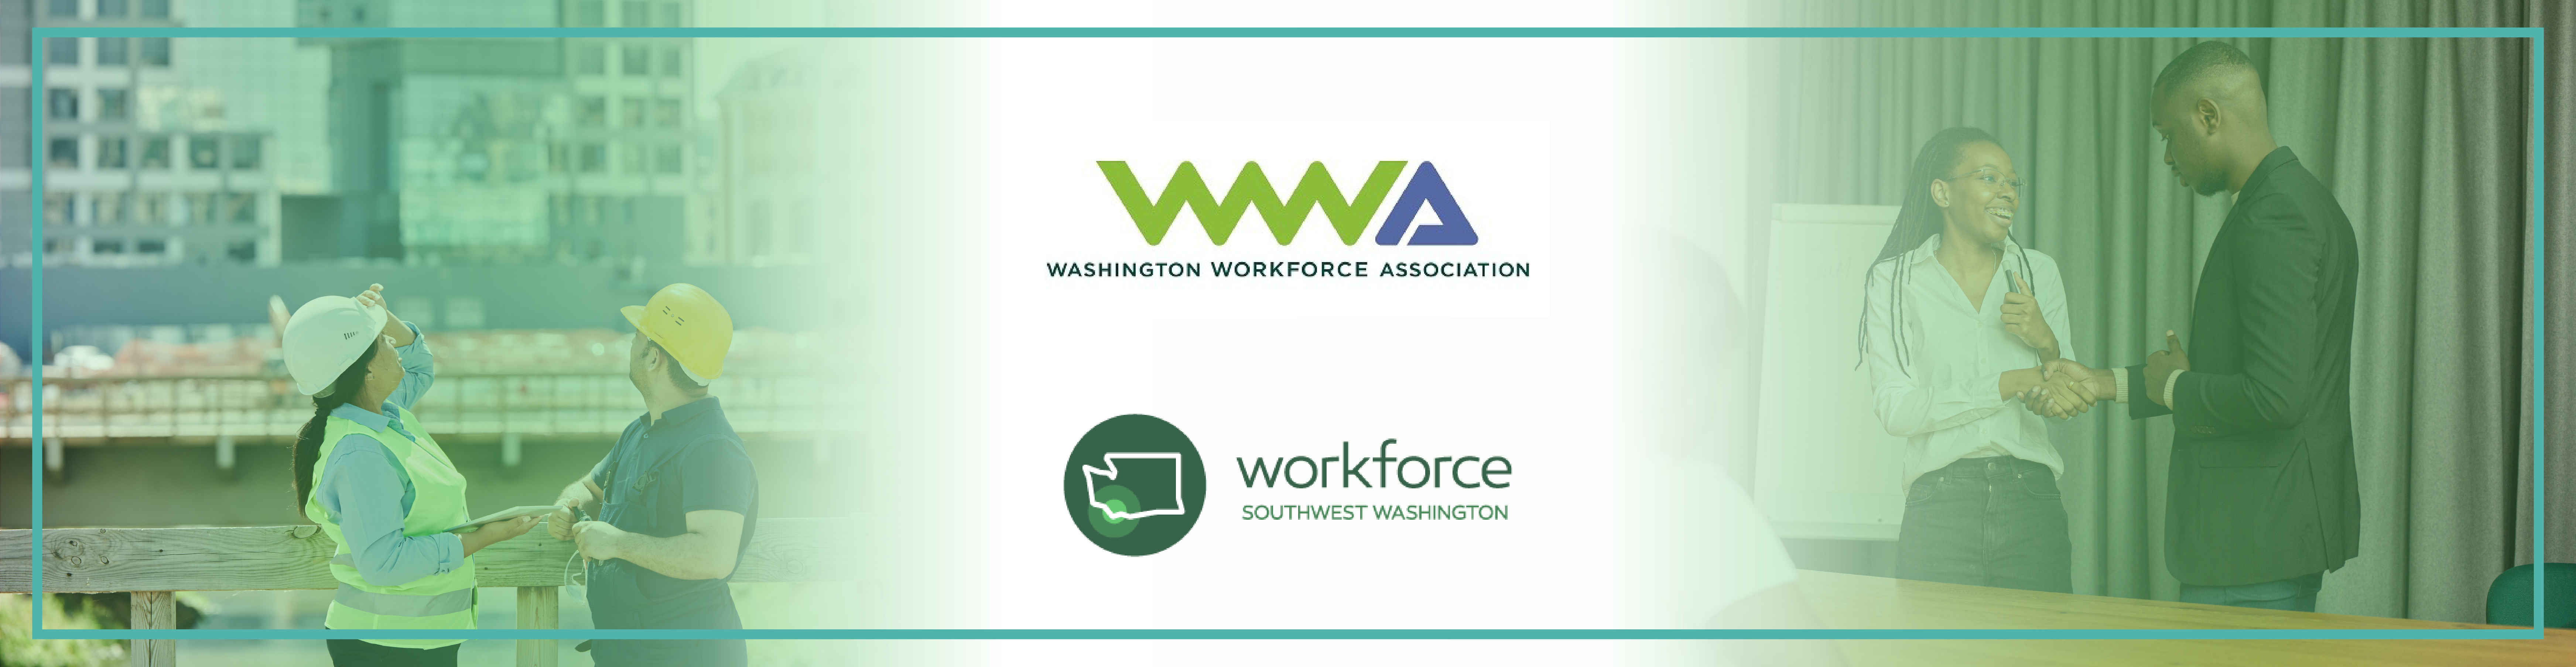 Now is the time to invest in local workforce solutions for Washington’s economic recovery